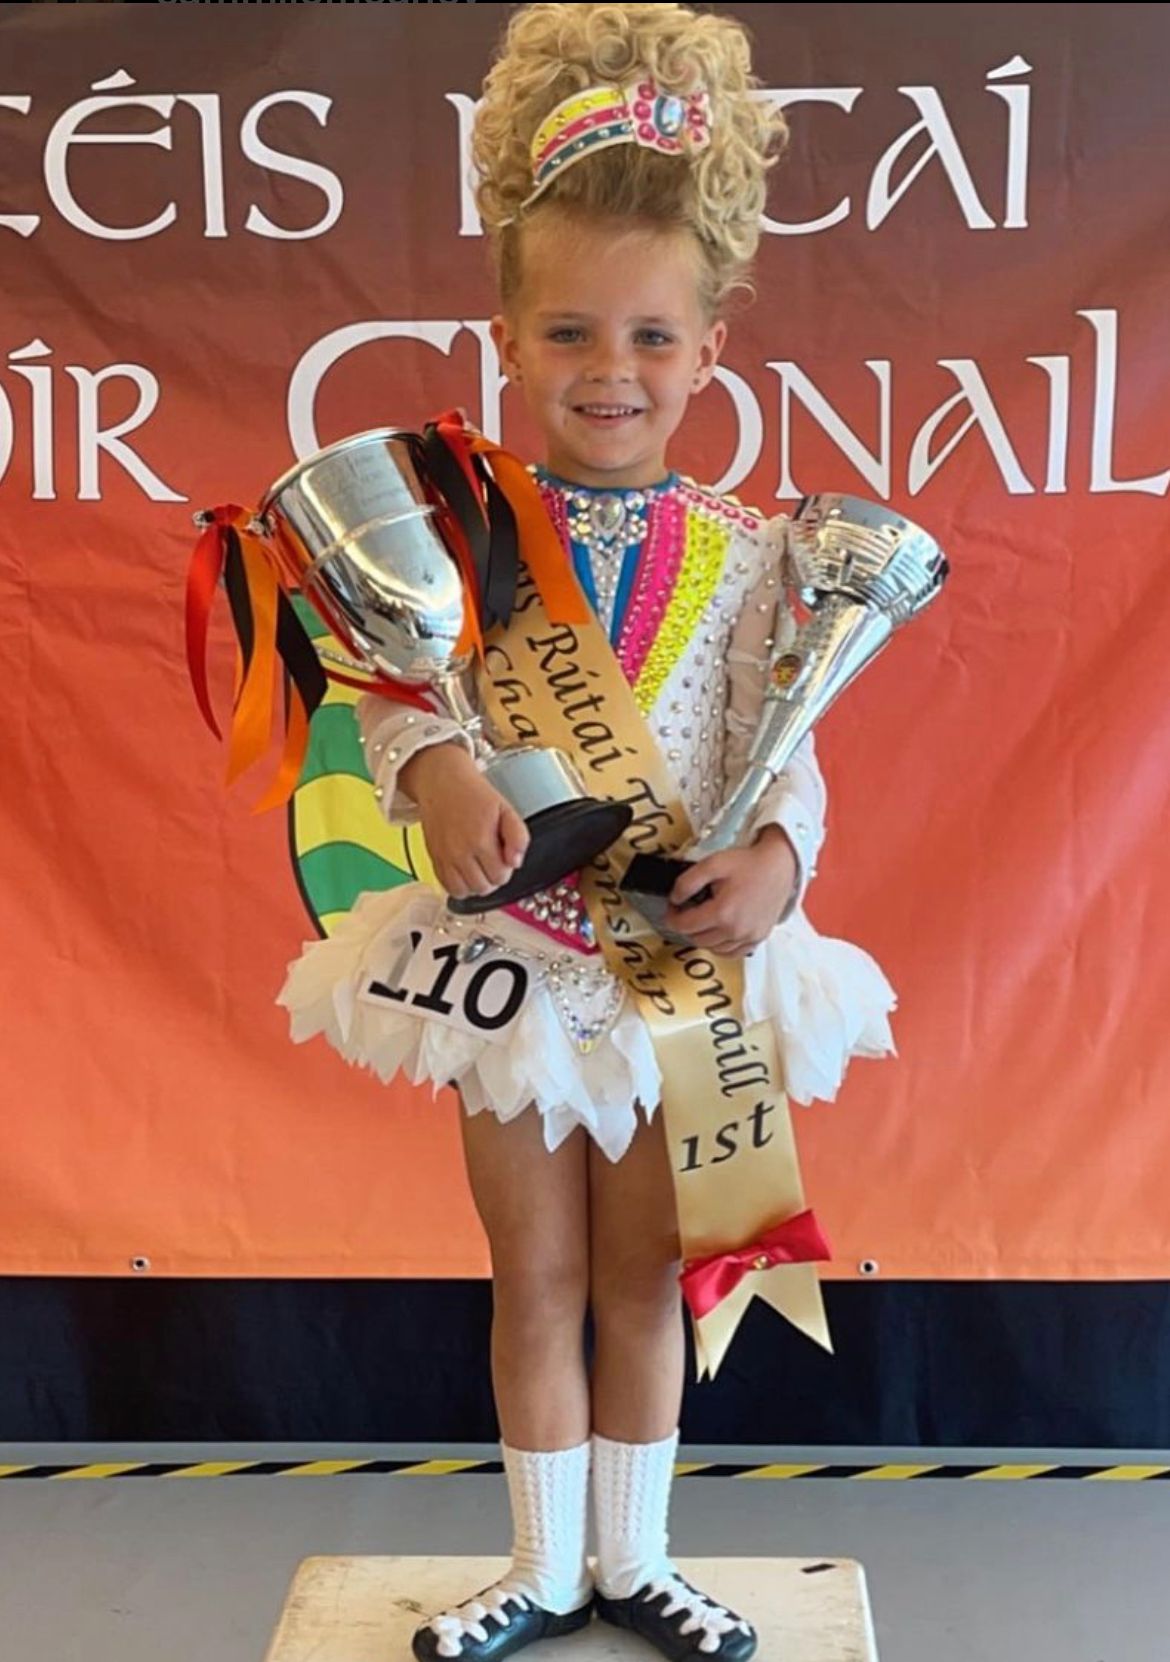 Powys dancing queen Layla climbs the world rankings